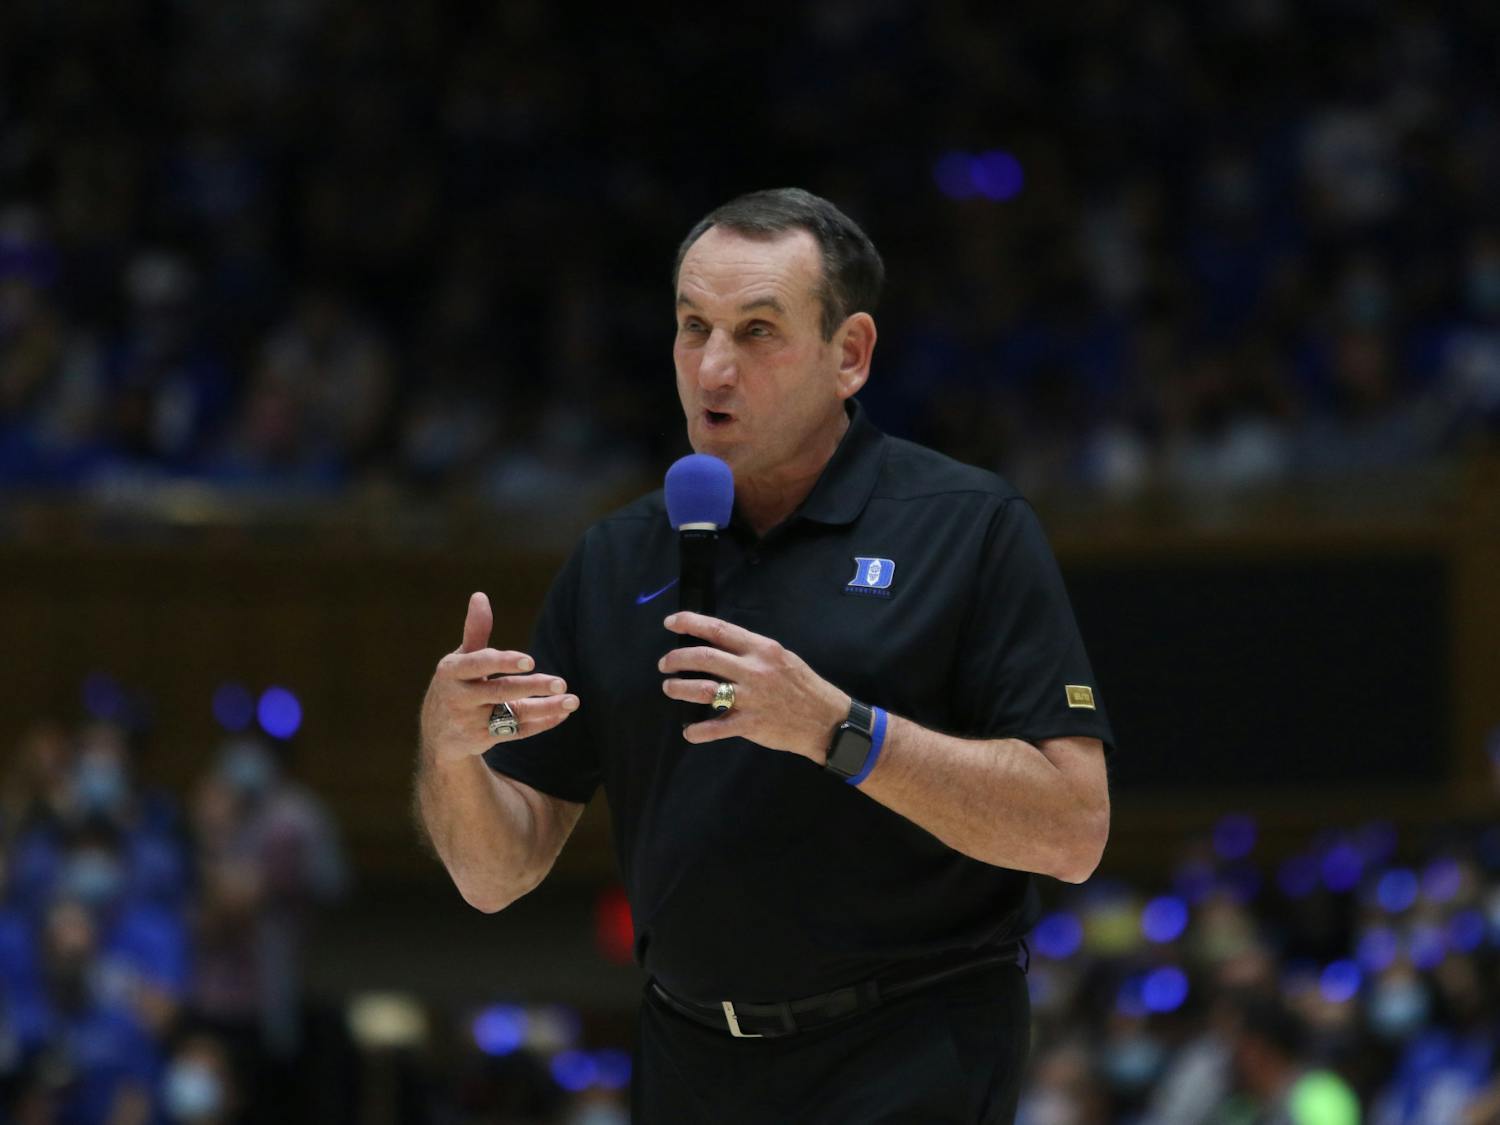 Coach K has racked up more wins than any head coach in college basketball, with his first one at Duke coming Nov. 29, 1980 against Stetson. 